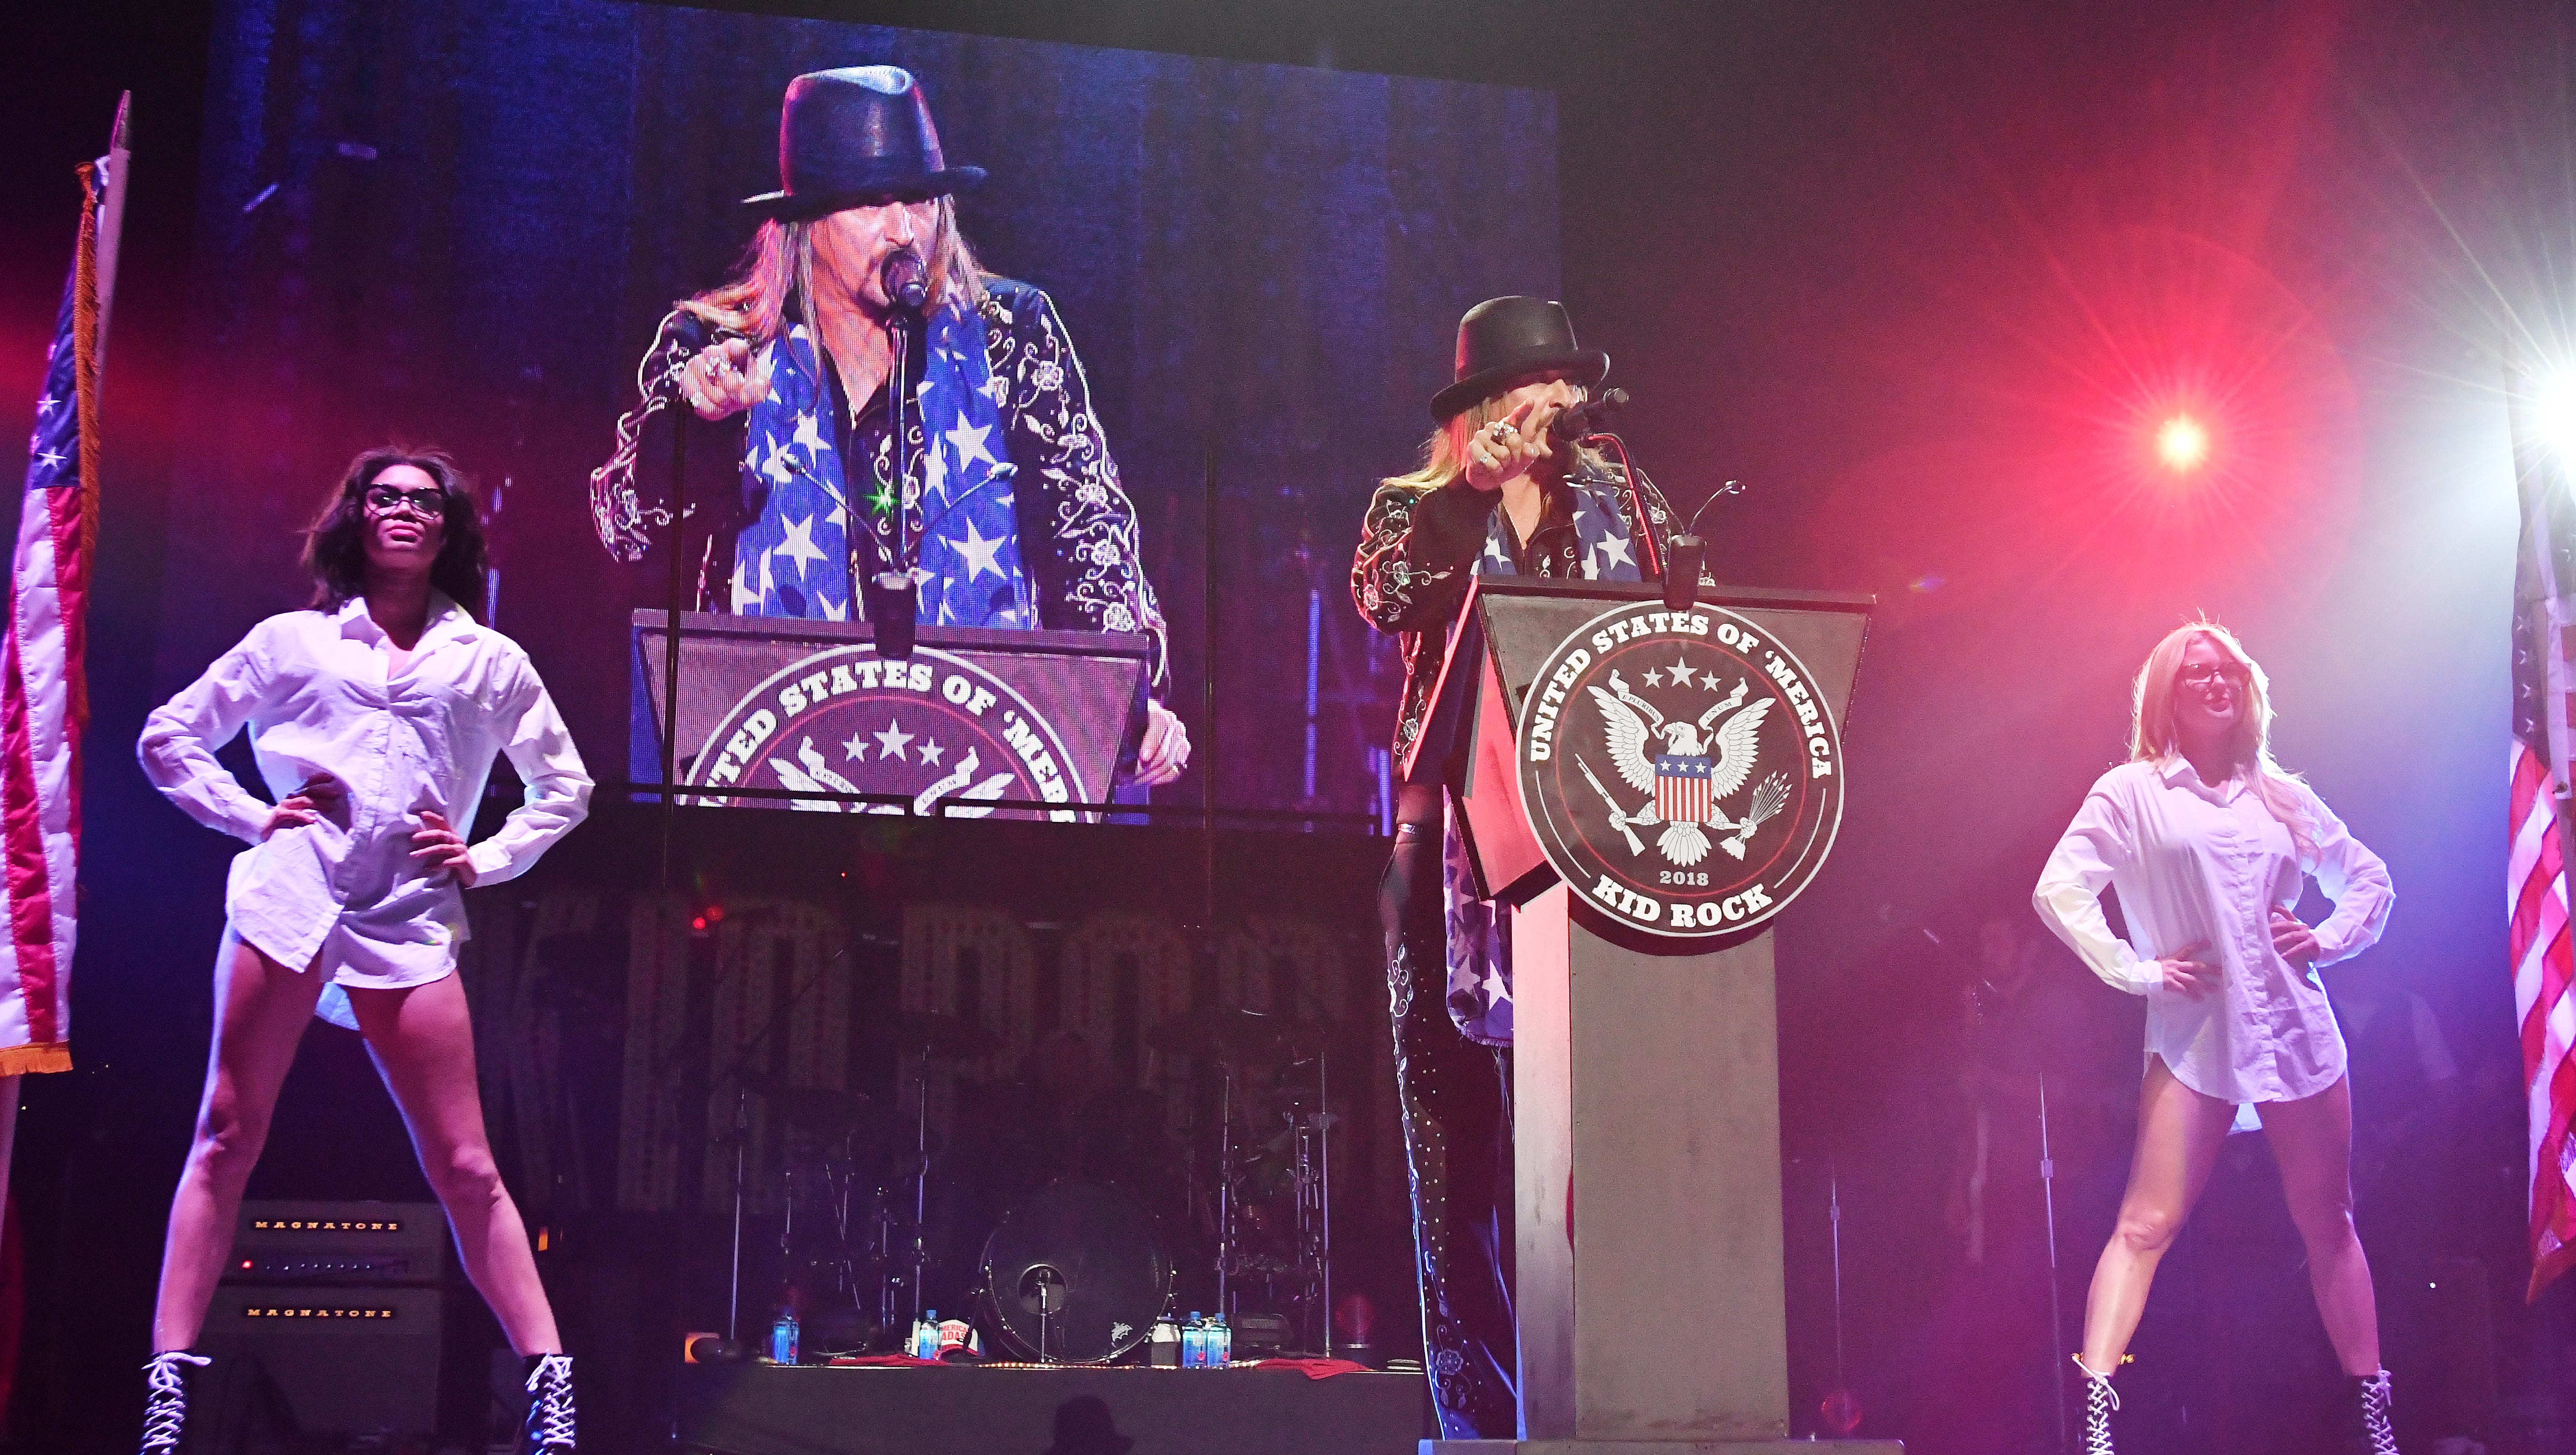 Kid Rock makes a political statement during the start of the first-ever concert at Little Caesars Arena on September 12, 2017.